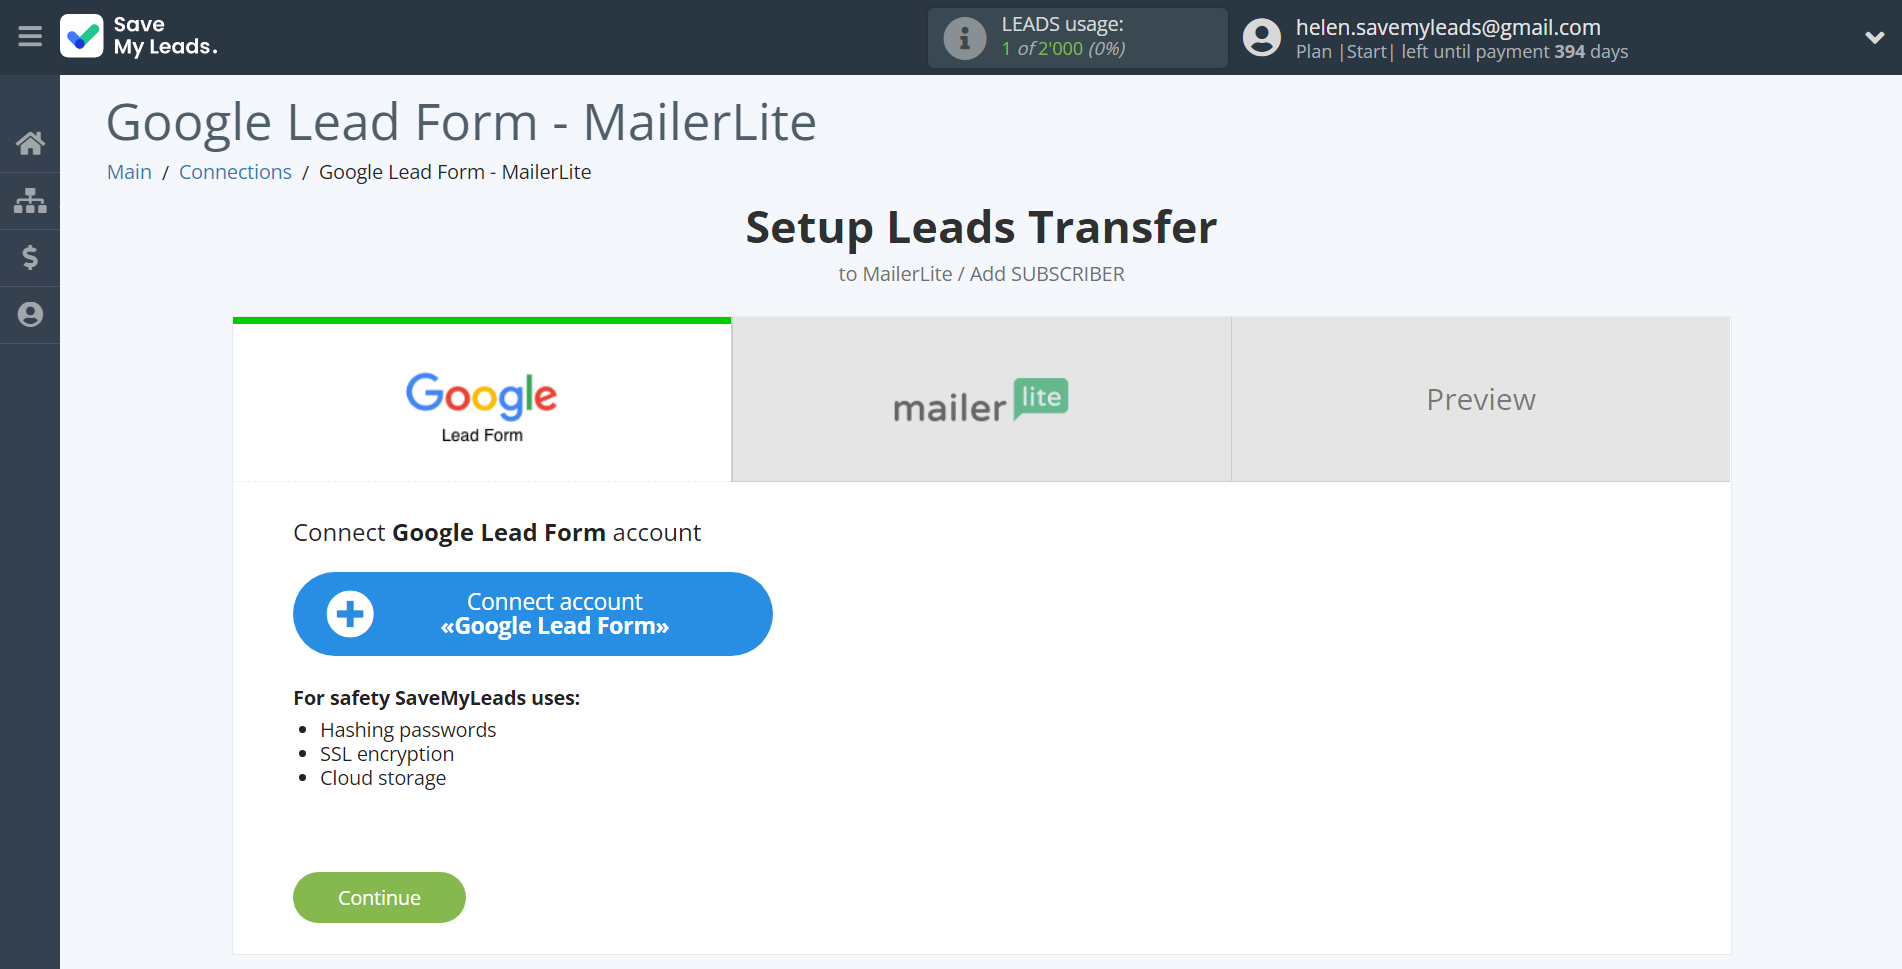 How to Connect Google Lead Form with MailerLite | Data Source account